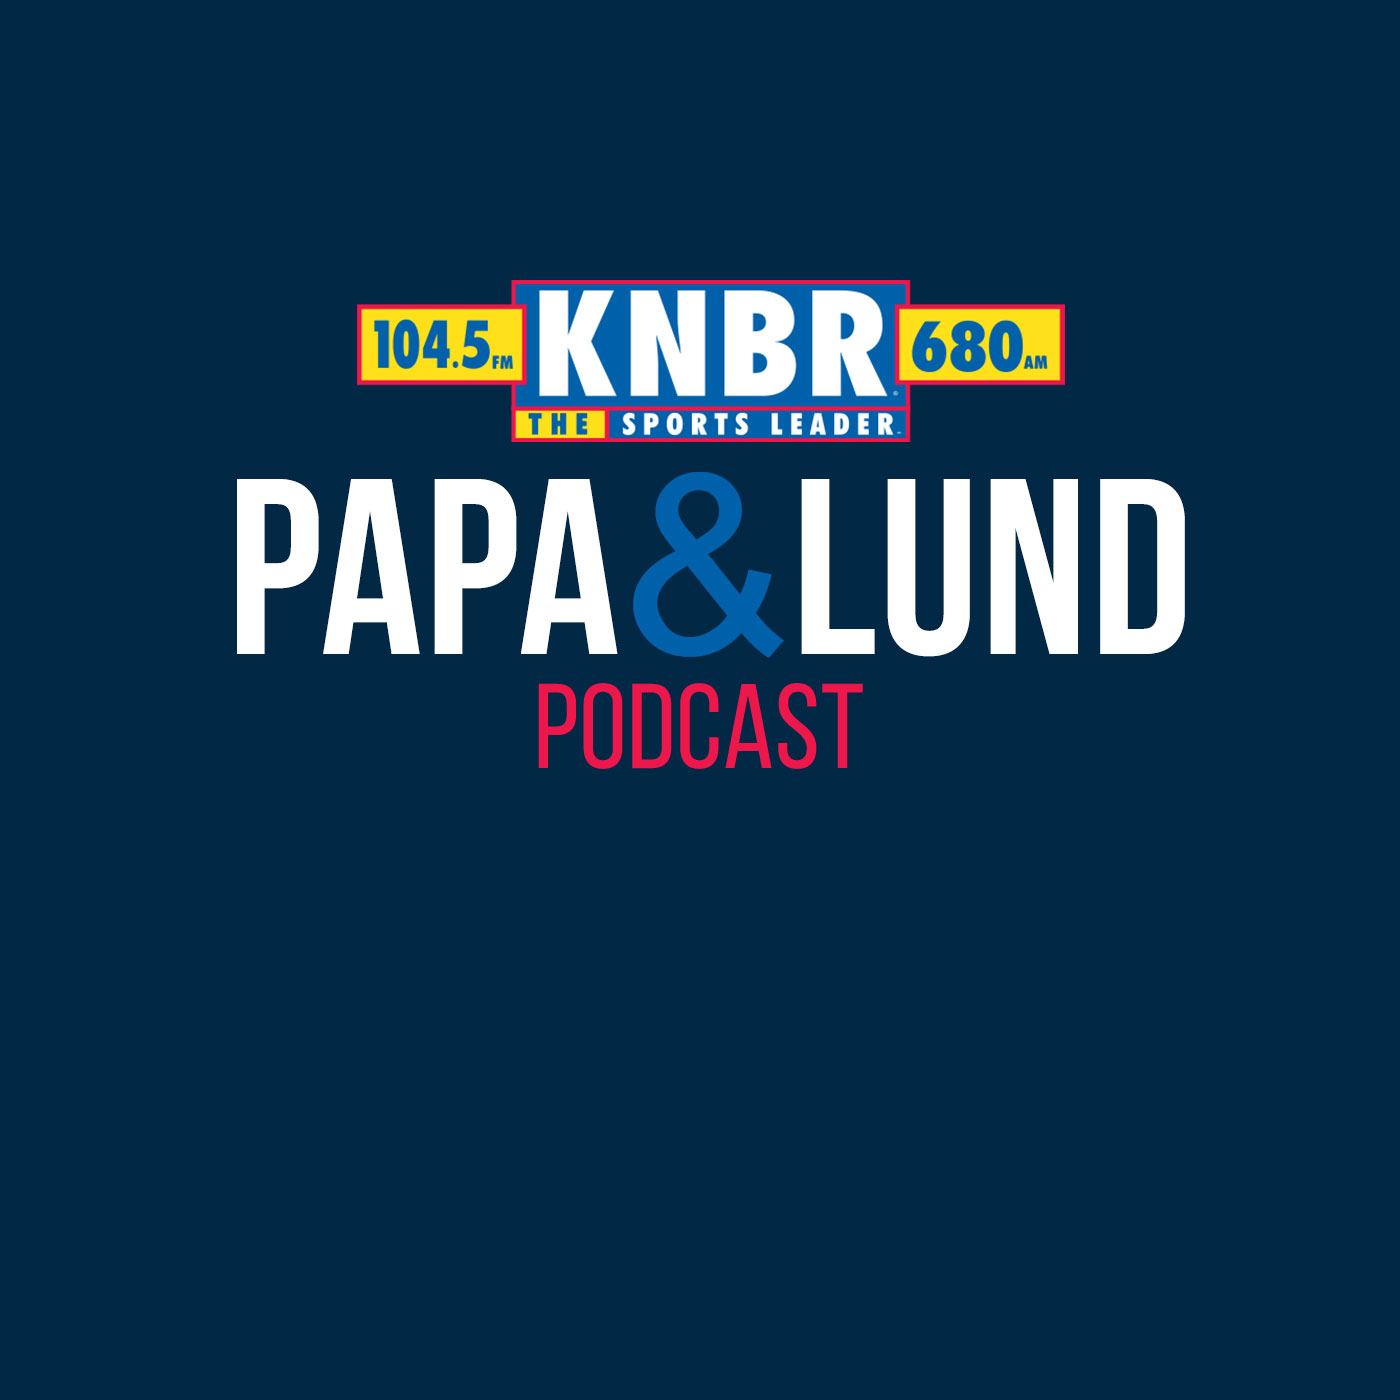 11-19 Papa & Lund: Why Mac Jones wasn't the right pick for the 49ers